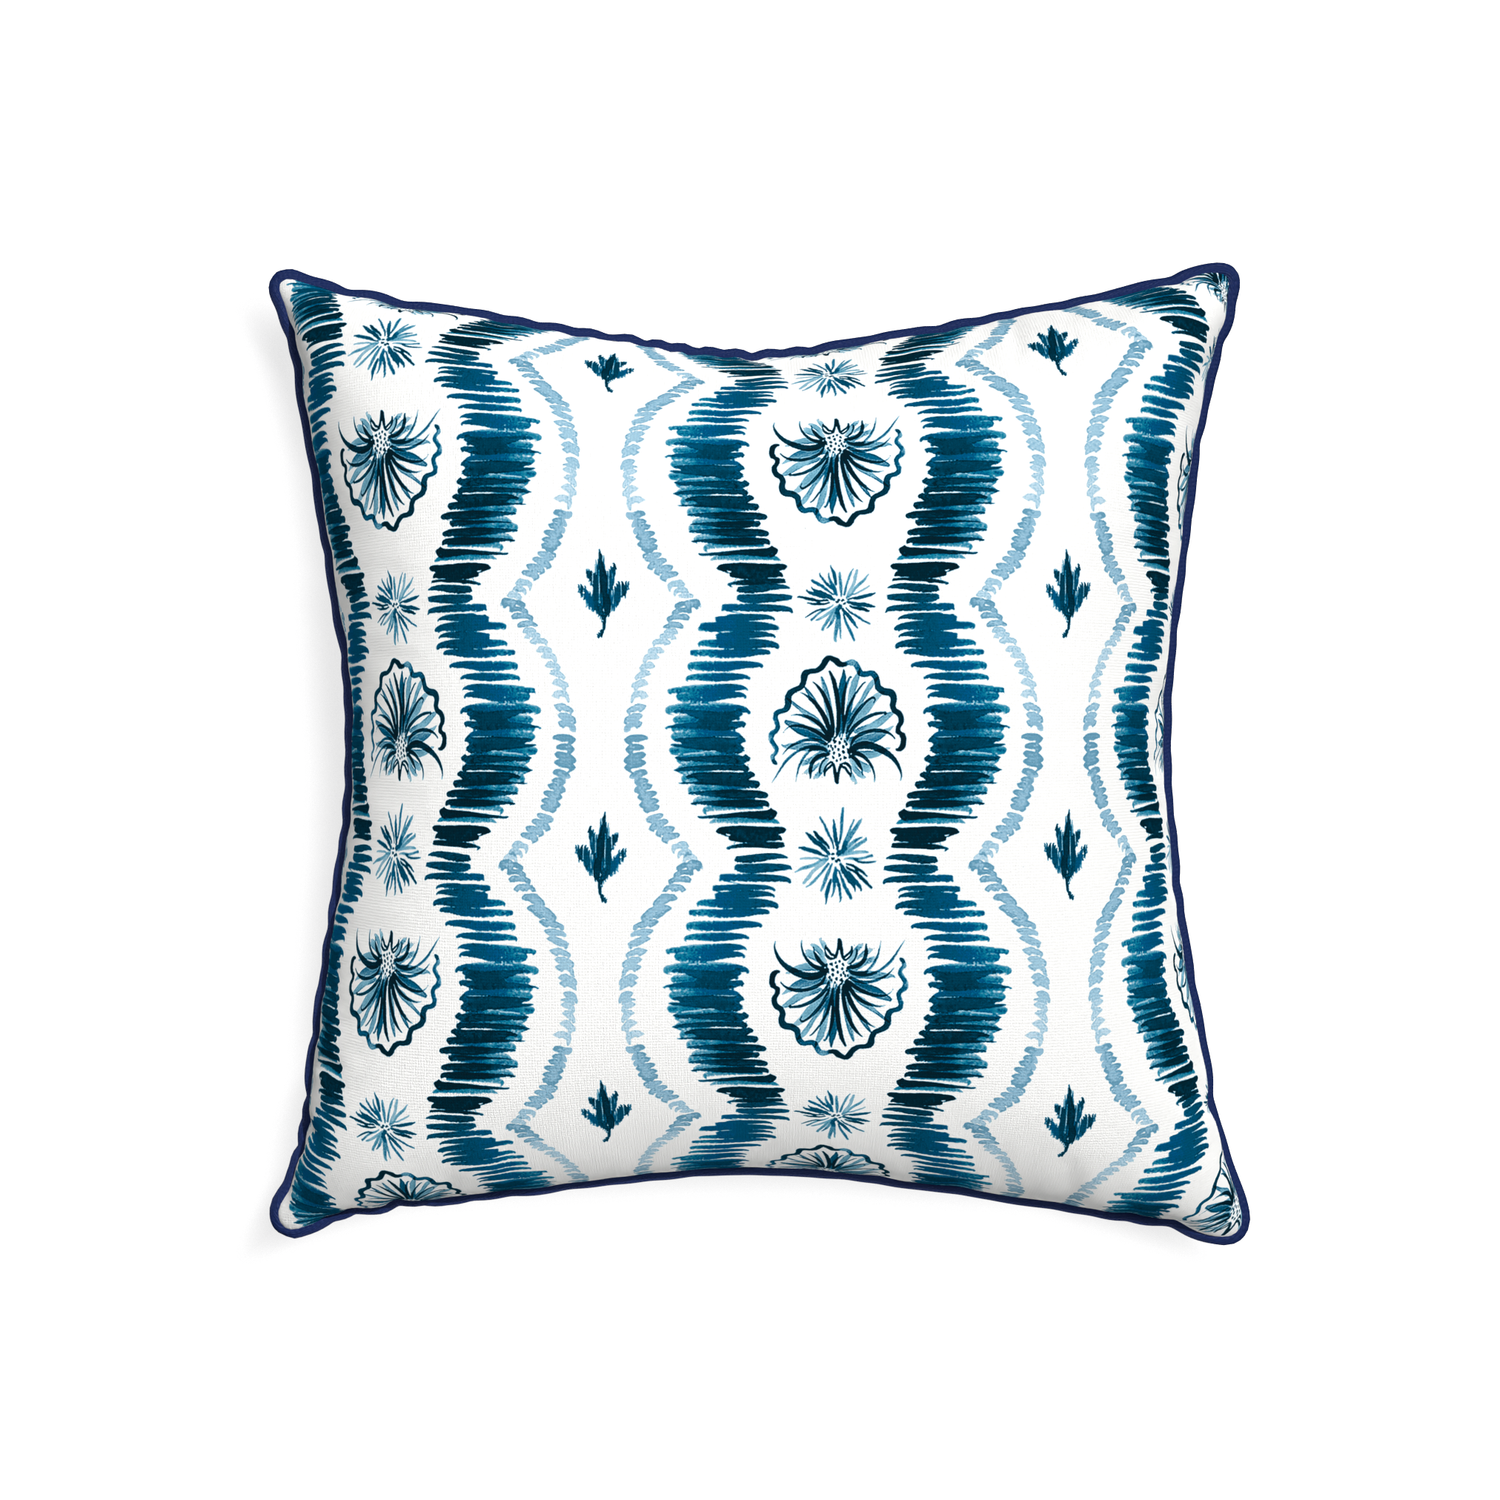 22-square alice custom blue ikatpillow with midnight piping on white background